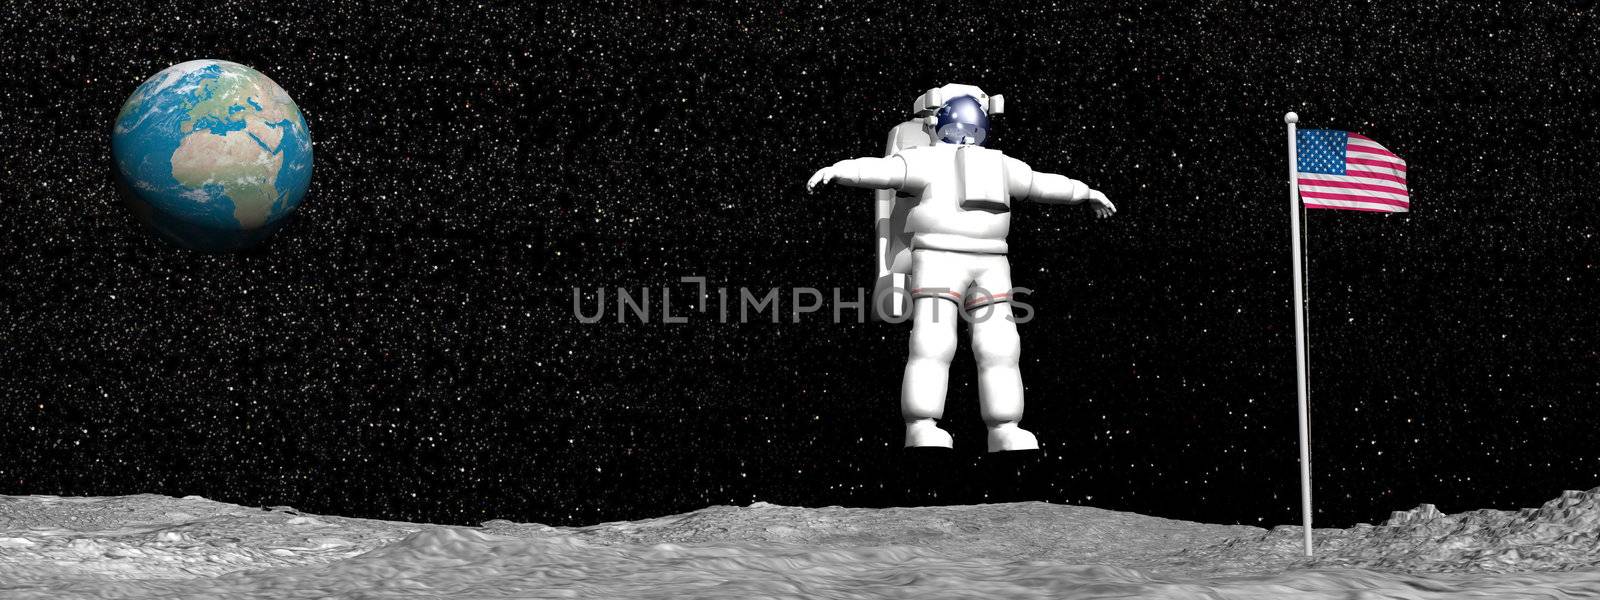 First man on the moon - 3D render by Elenaphotos21